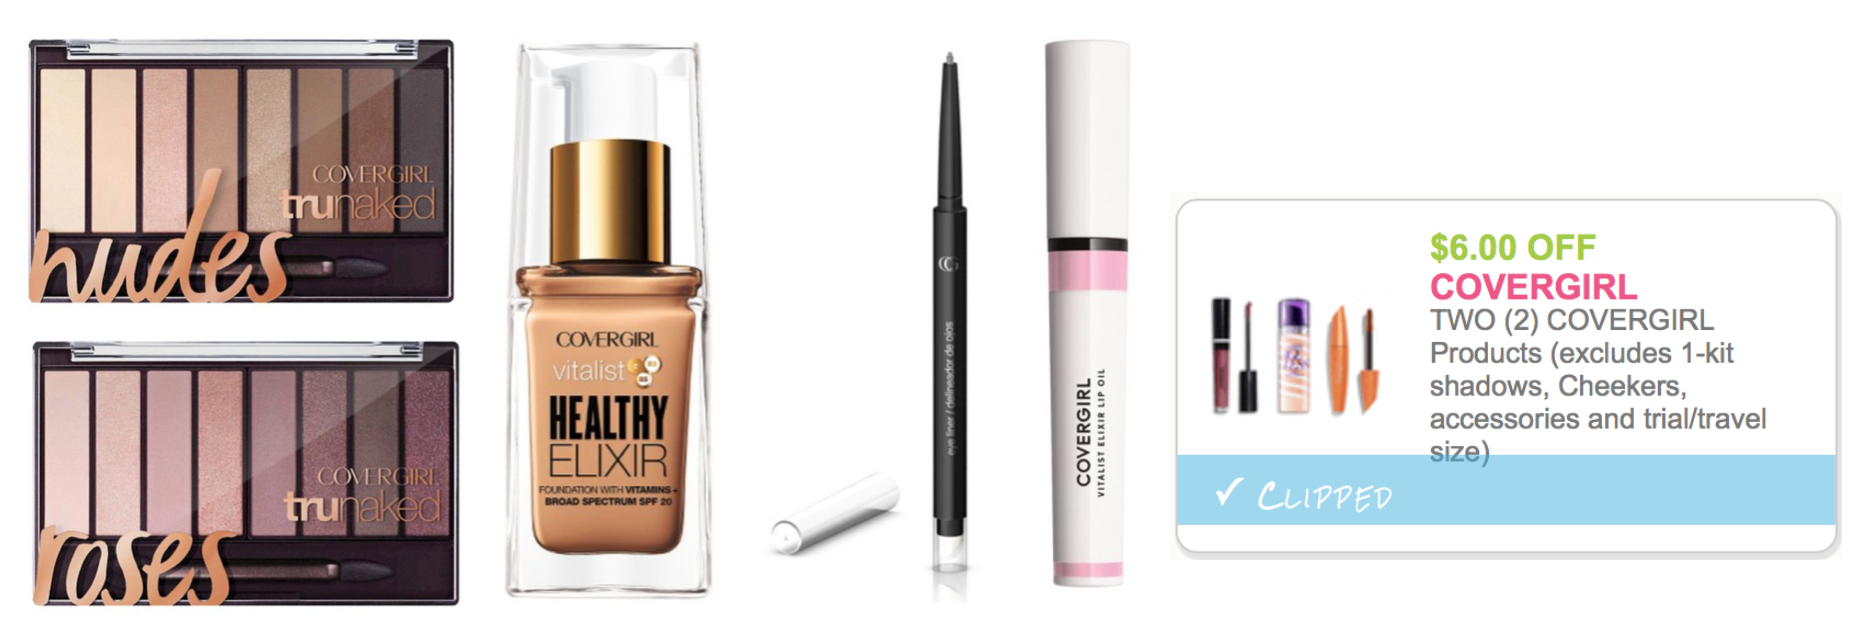 Hot New High Value 6 2 Covergirl Products Printable Coupon Dapper Deals